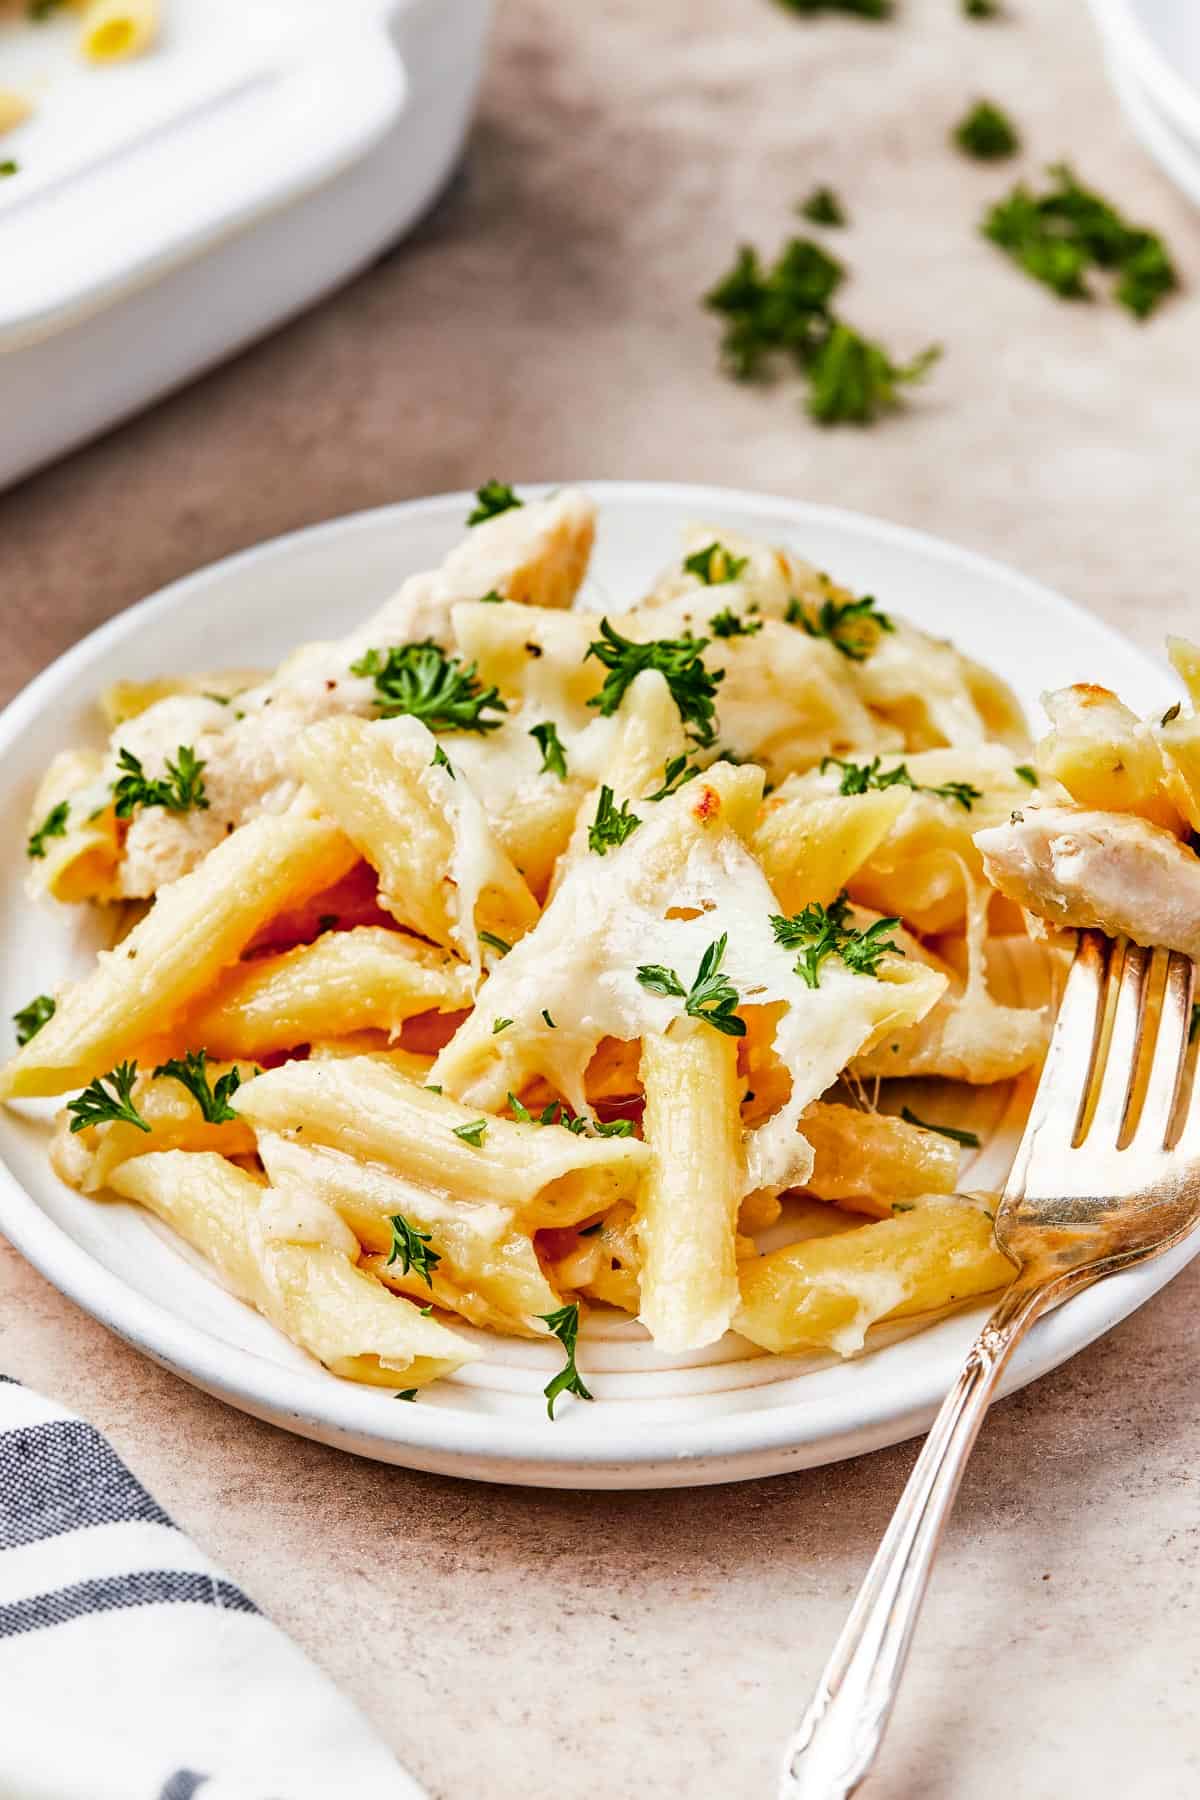 Chicken pasta with creamy sauce and melted cheese, on a small serving plate with a fork.